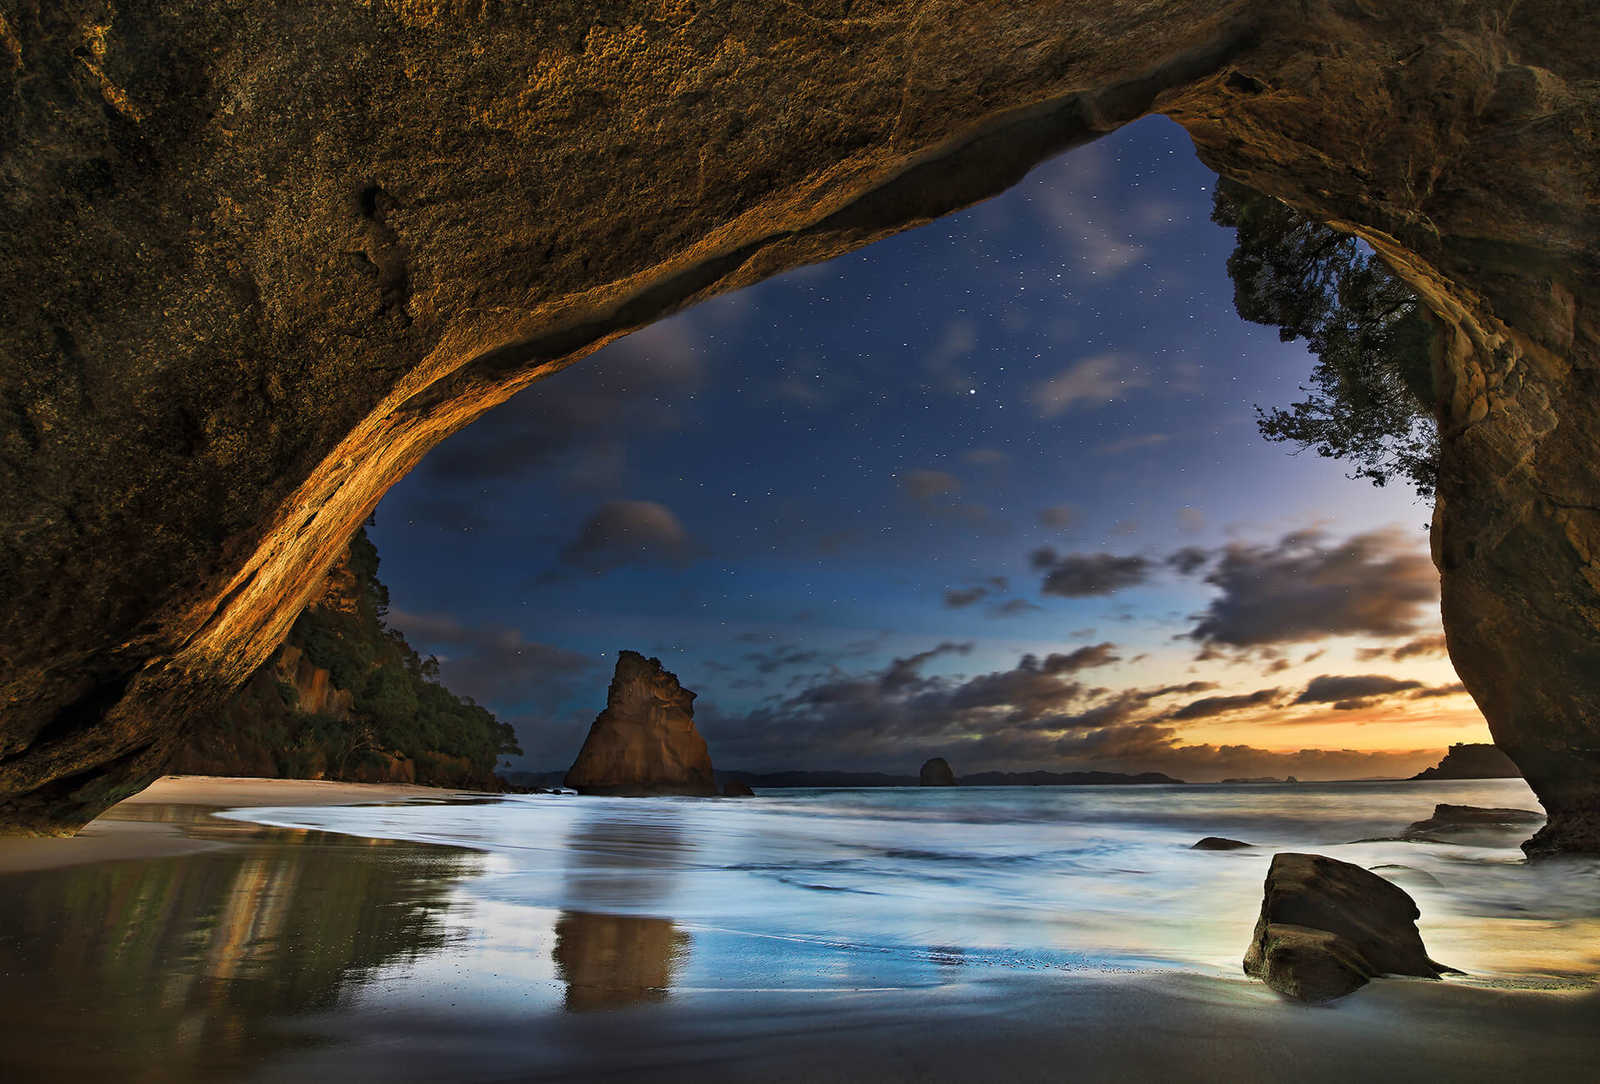         Photo wallpaper nature cave in New Zealand - Brown, Blue
    